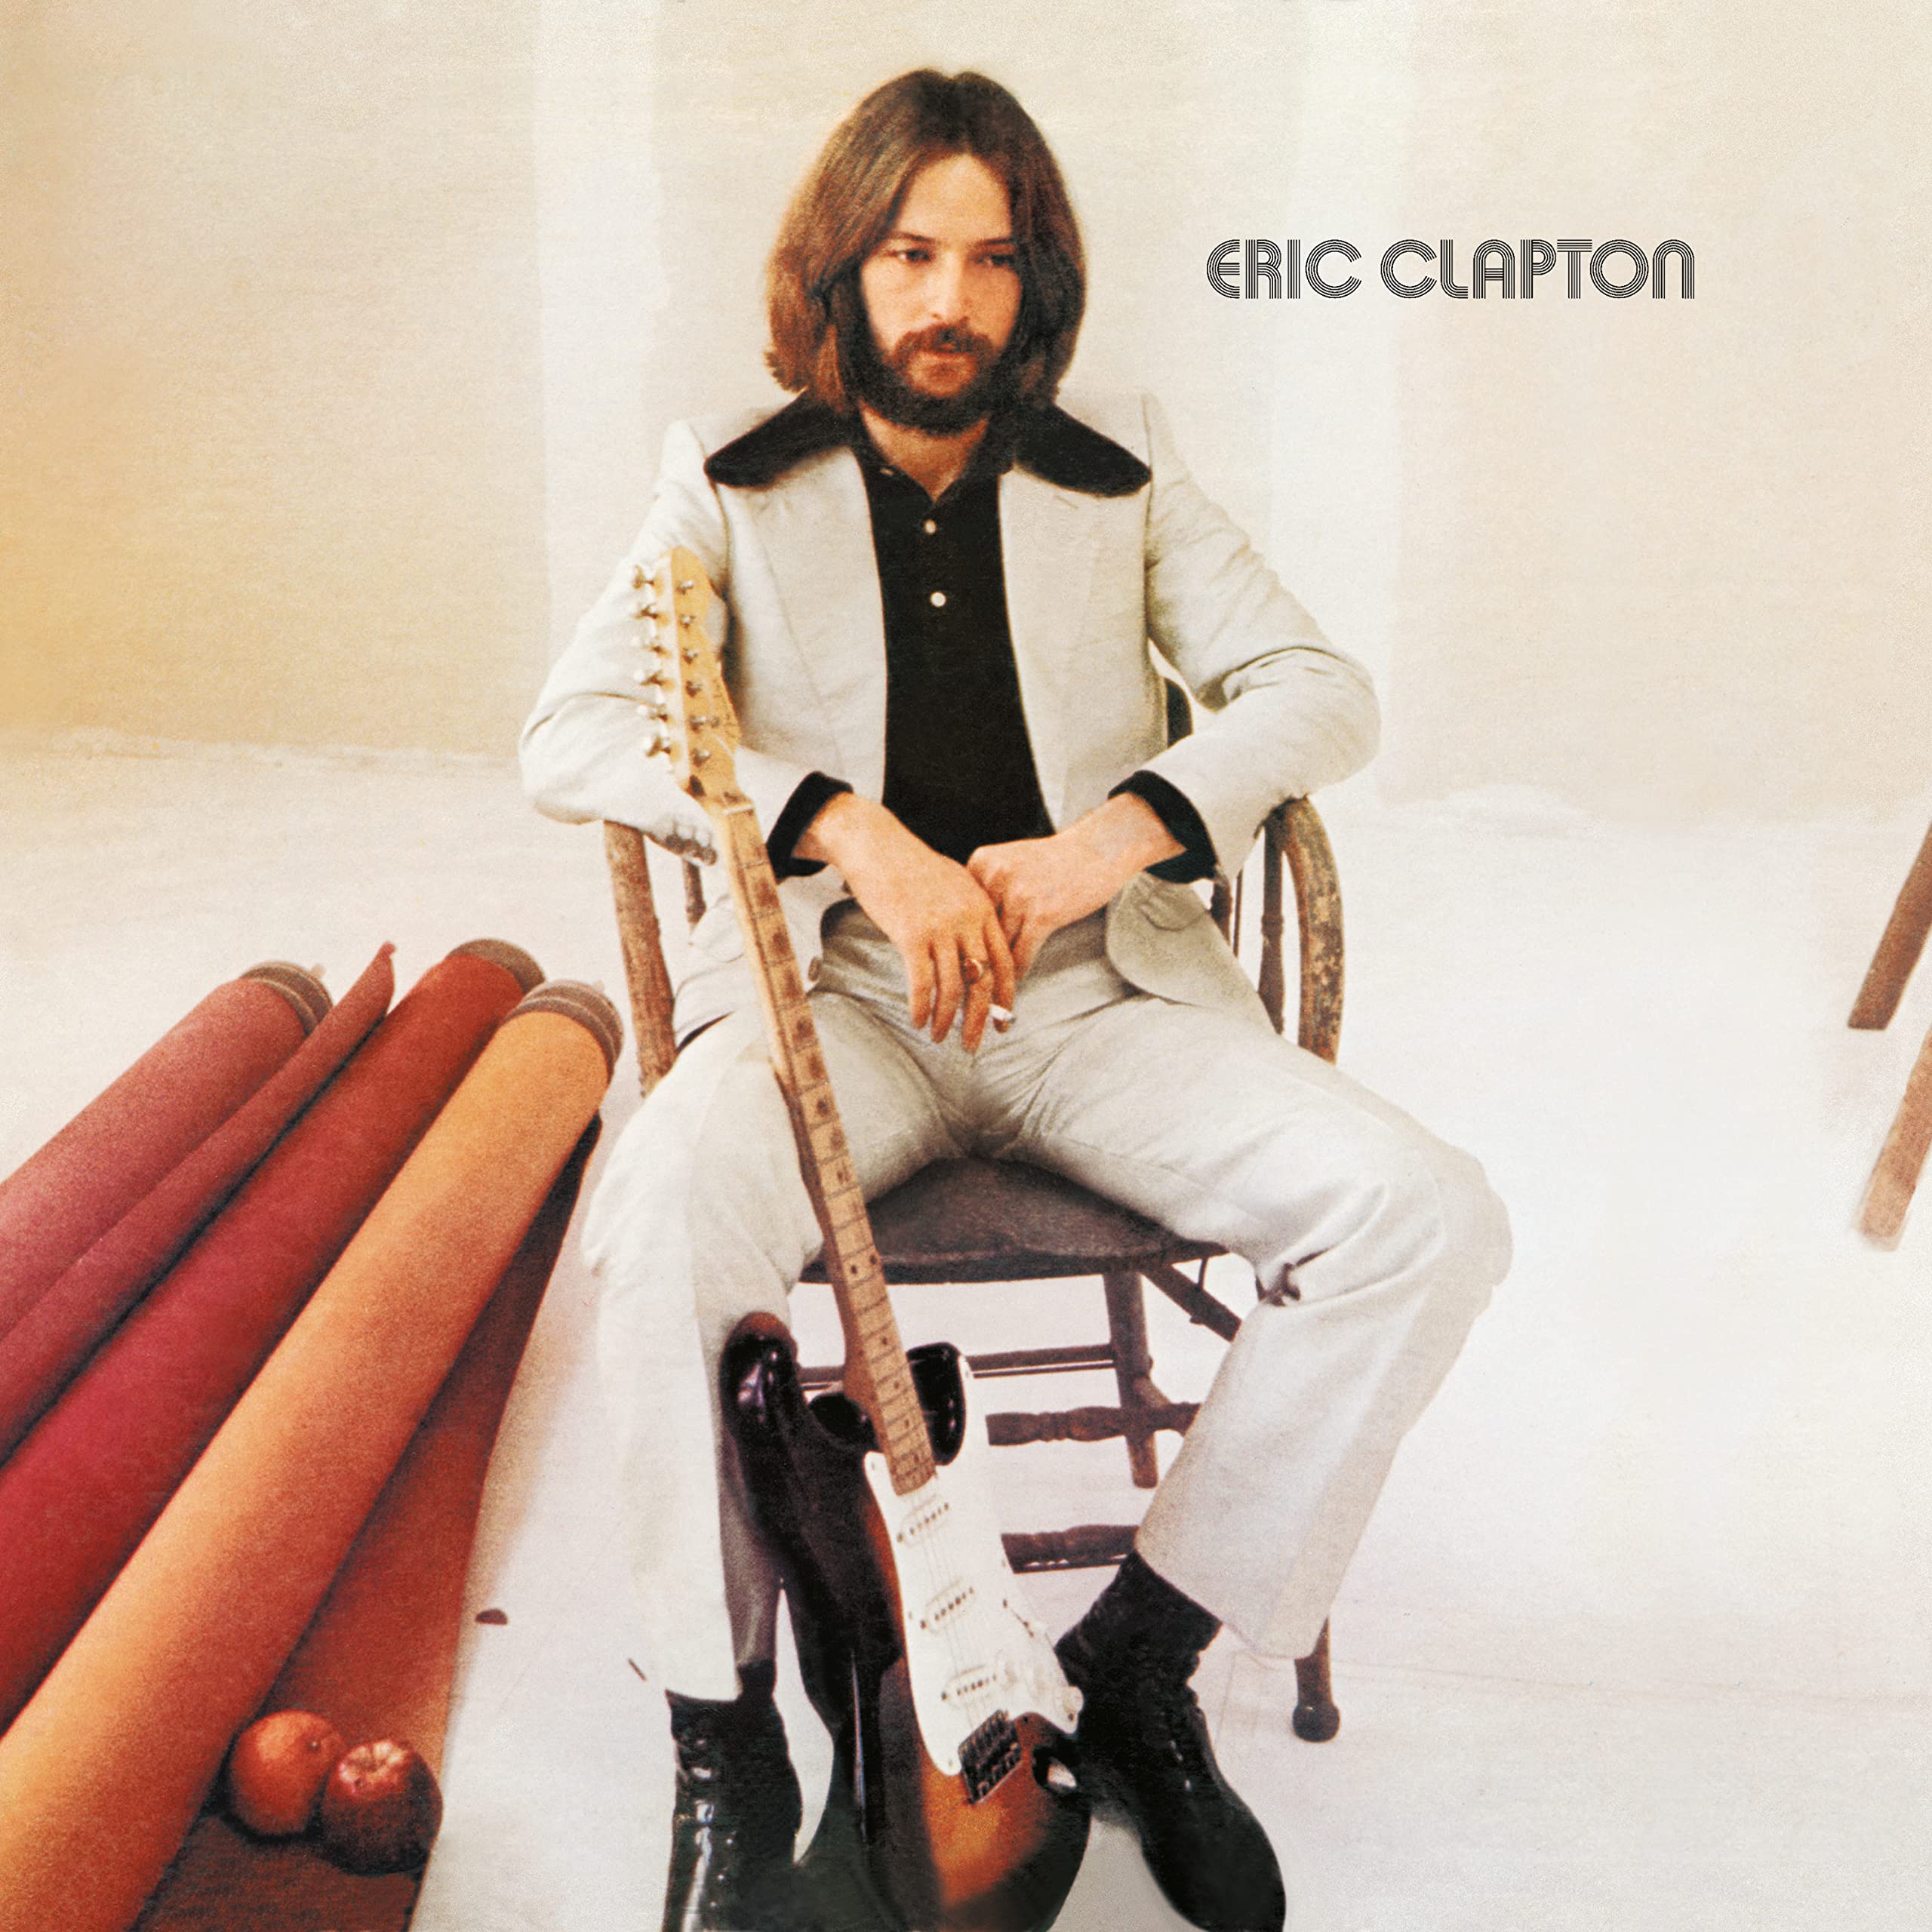 Eric Clapton - Eric Clapton (4CD Deluxe Edition) (2021) FLAC Download